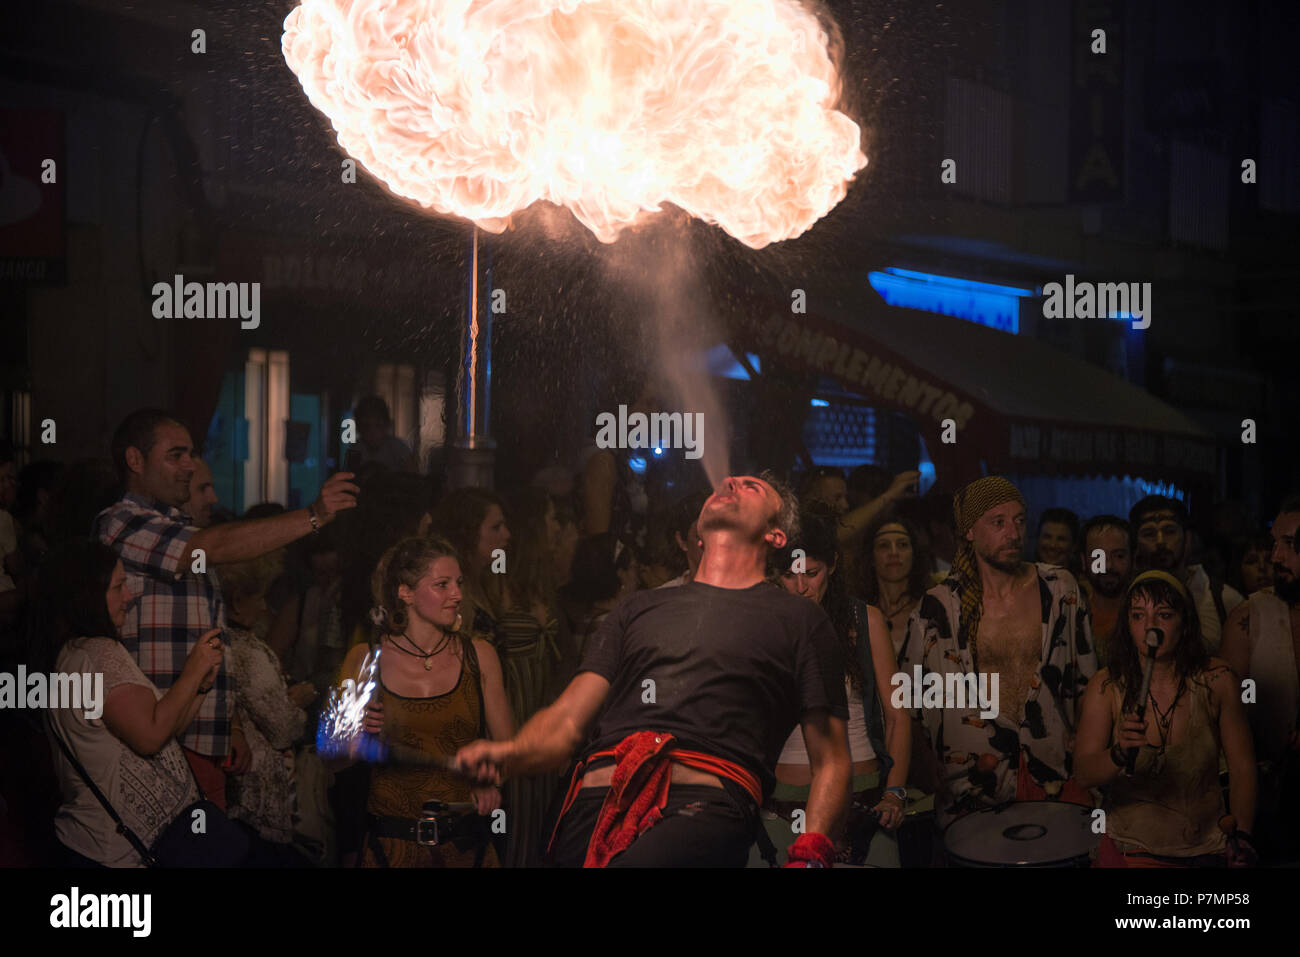 A street performance of fire by the circus school Babarots helps celebrate the festival of Saint John in Peniscola Spain on June 21st 2018 Stock Photo